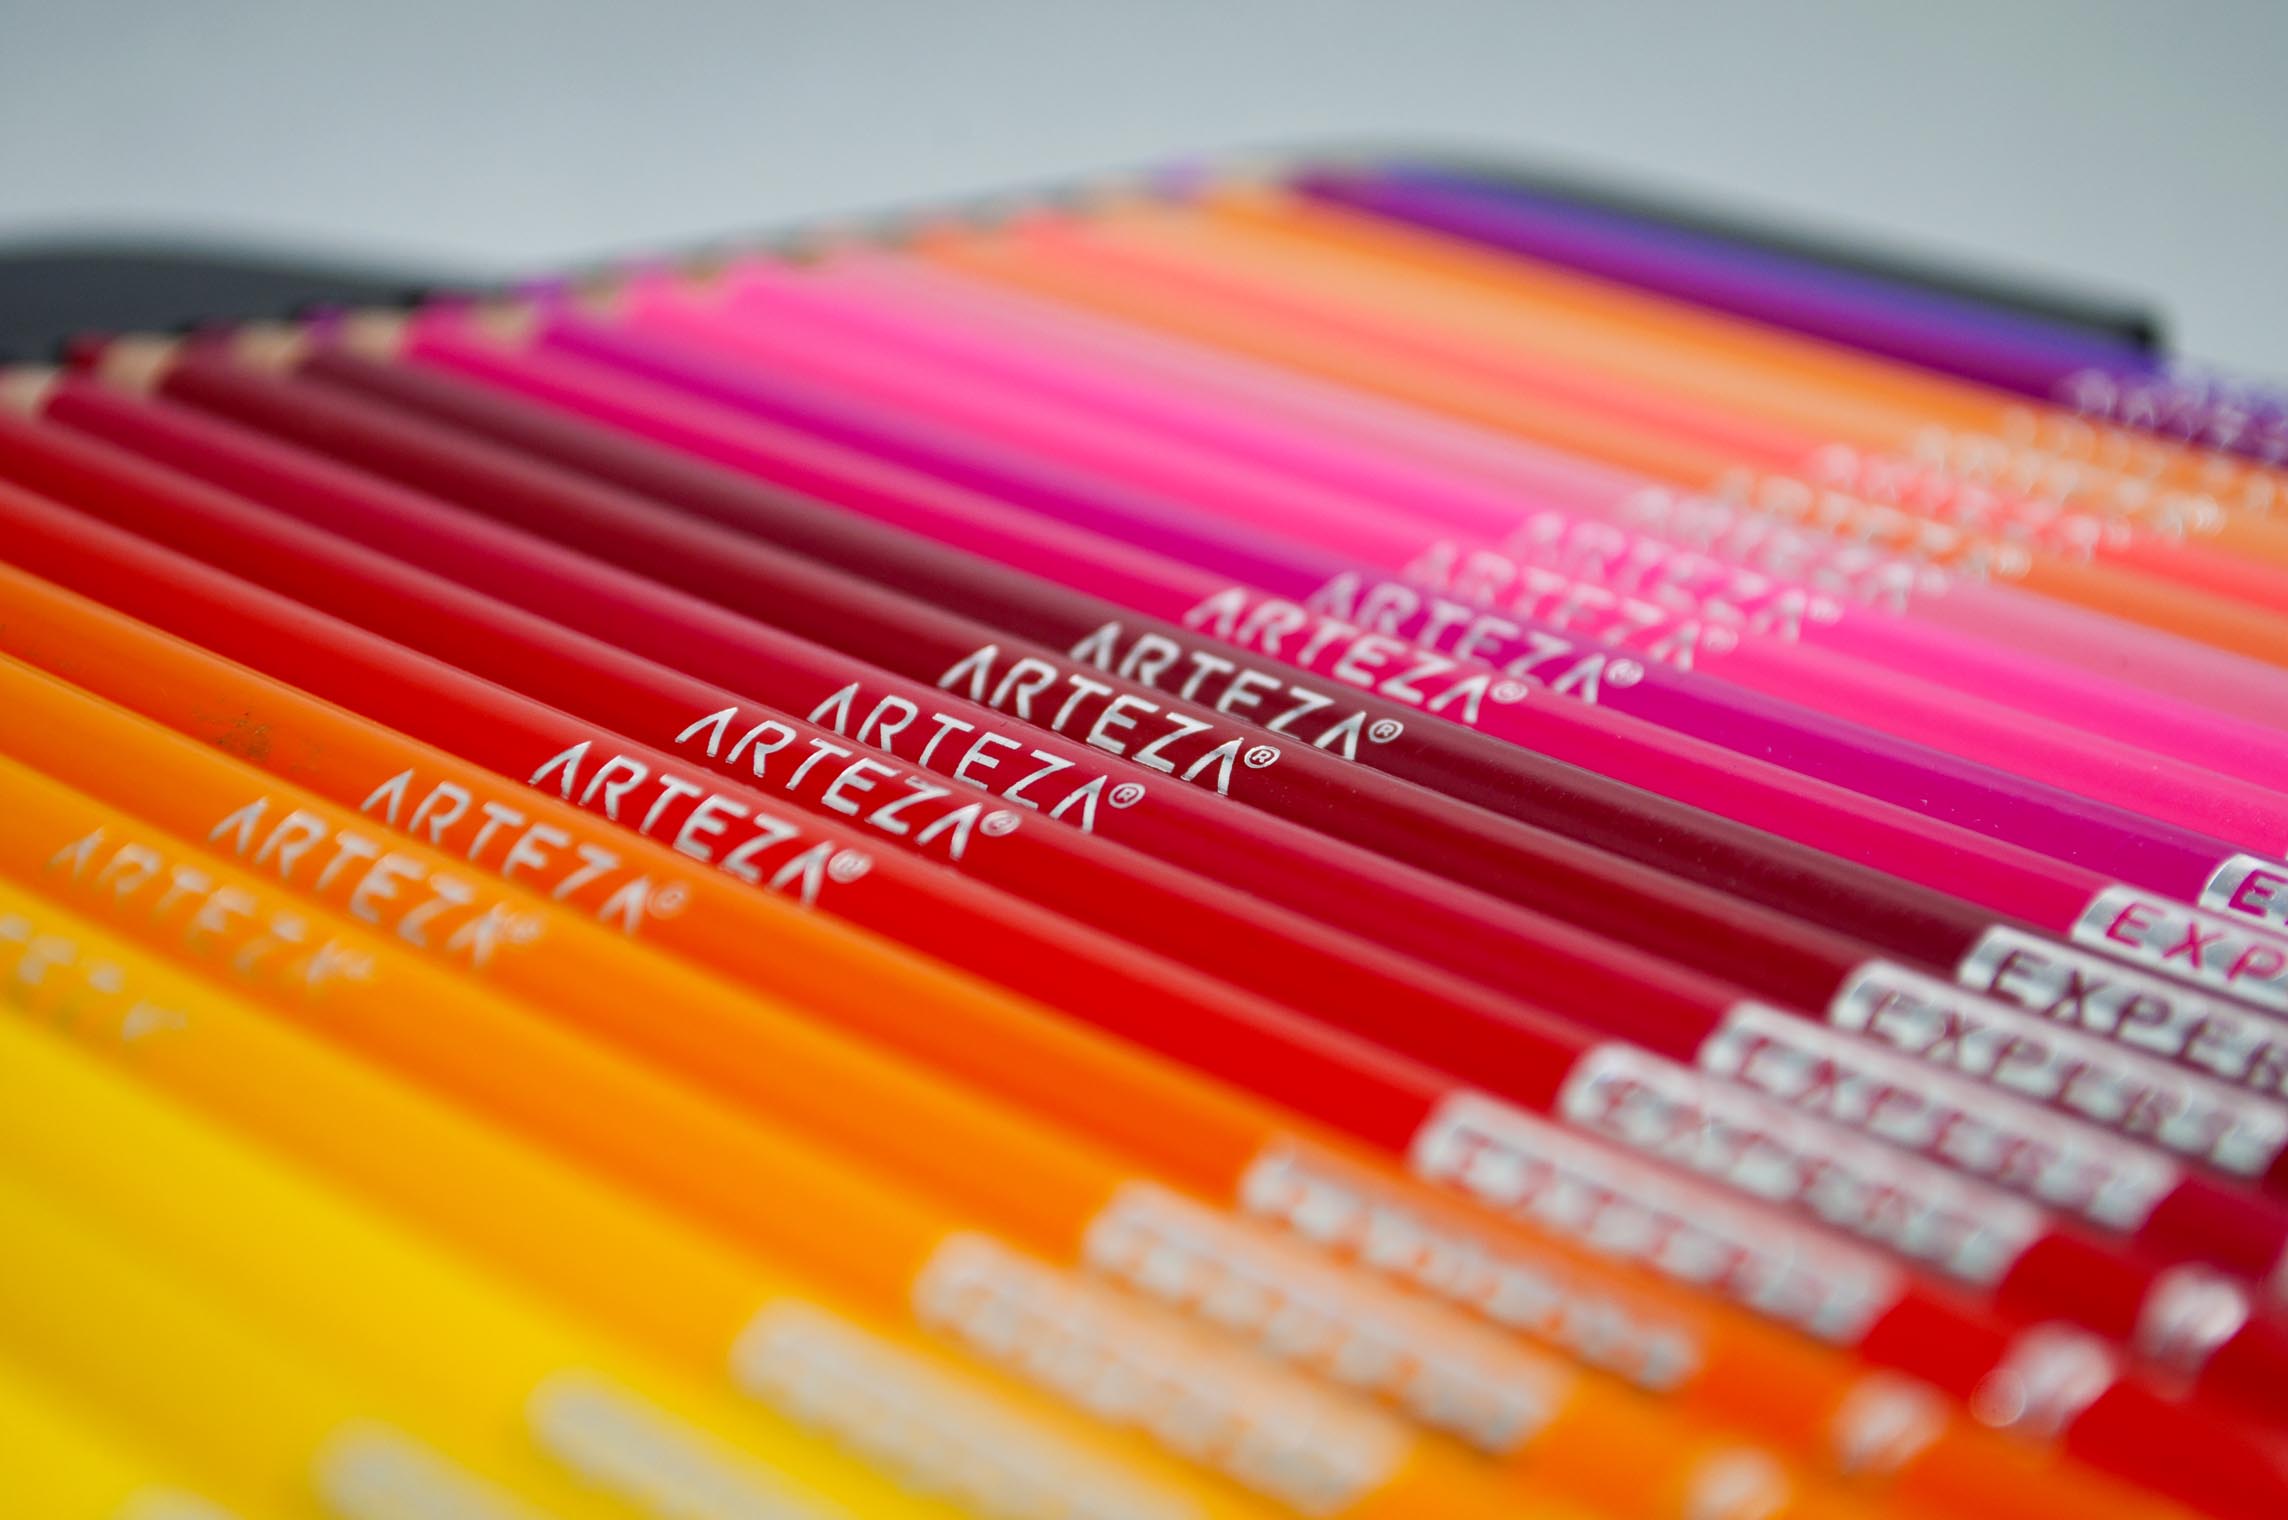 Arteza Expert Colored Pencils The Art Gear Guide The arteza brand of coloured pencils have been brought to our attention. arteza expert colored pencils the